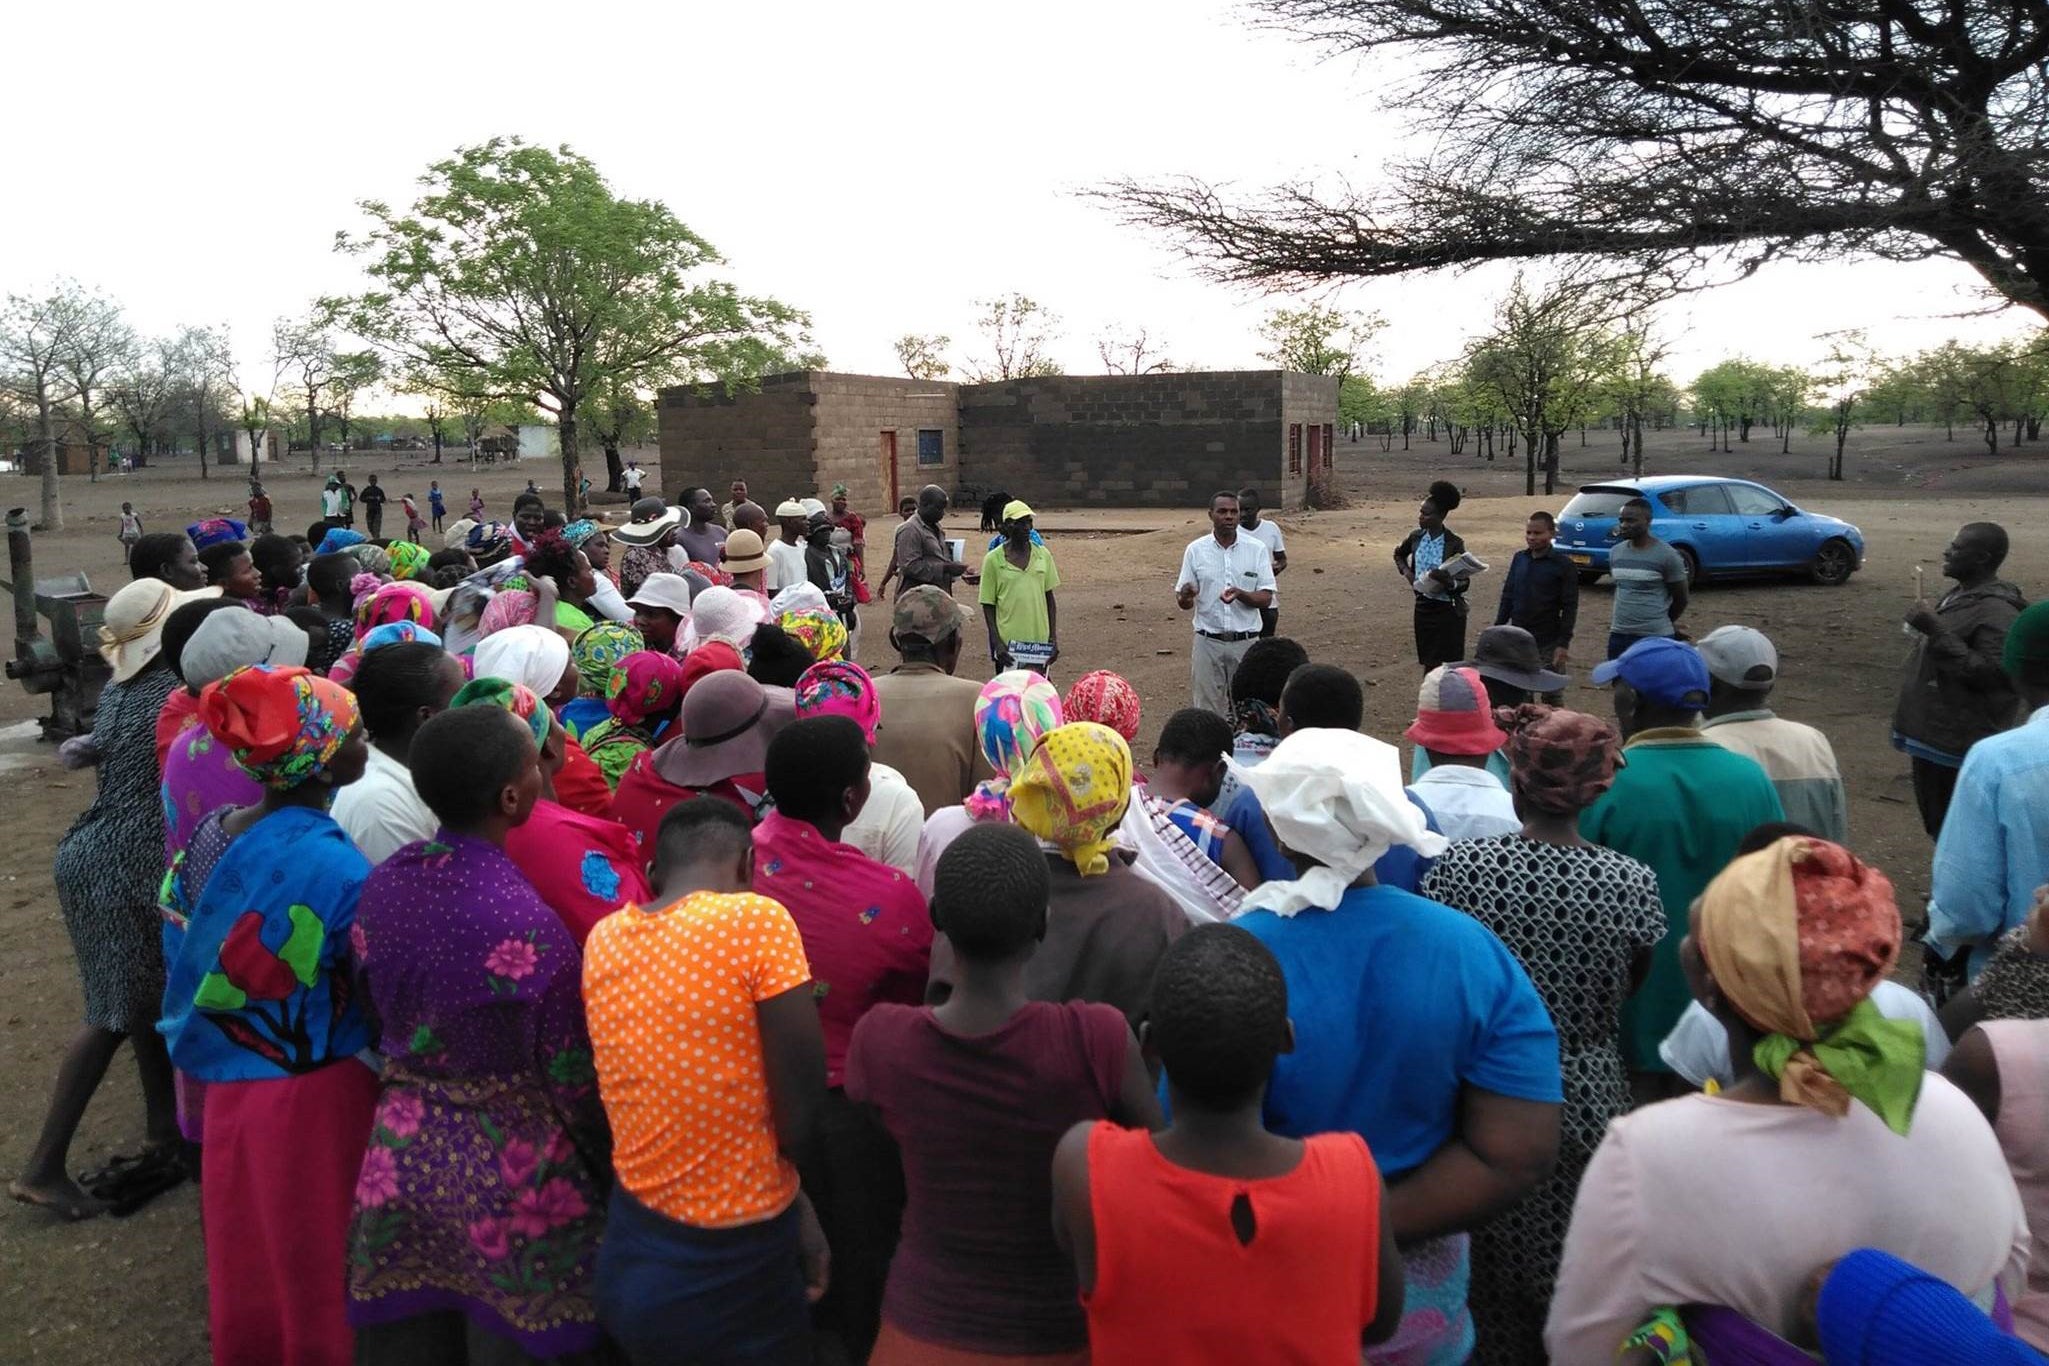 Staff from the Masvingo Centre for Research Advocacy and Development (MACRAD Trust) consult with members of the Chilonga community in Chiredzi. 